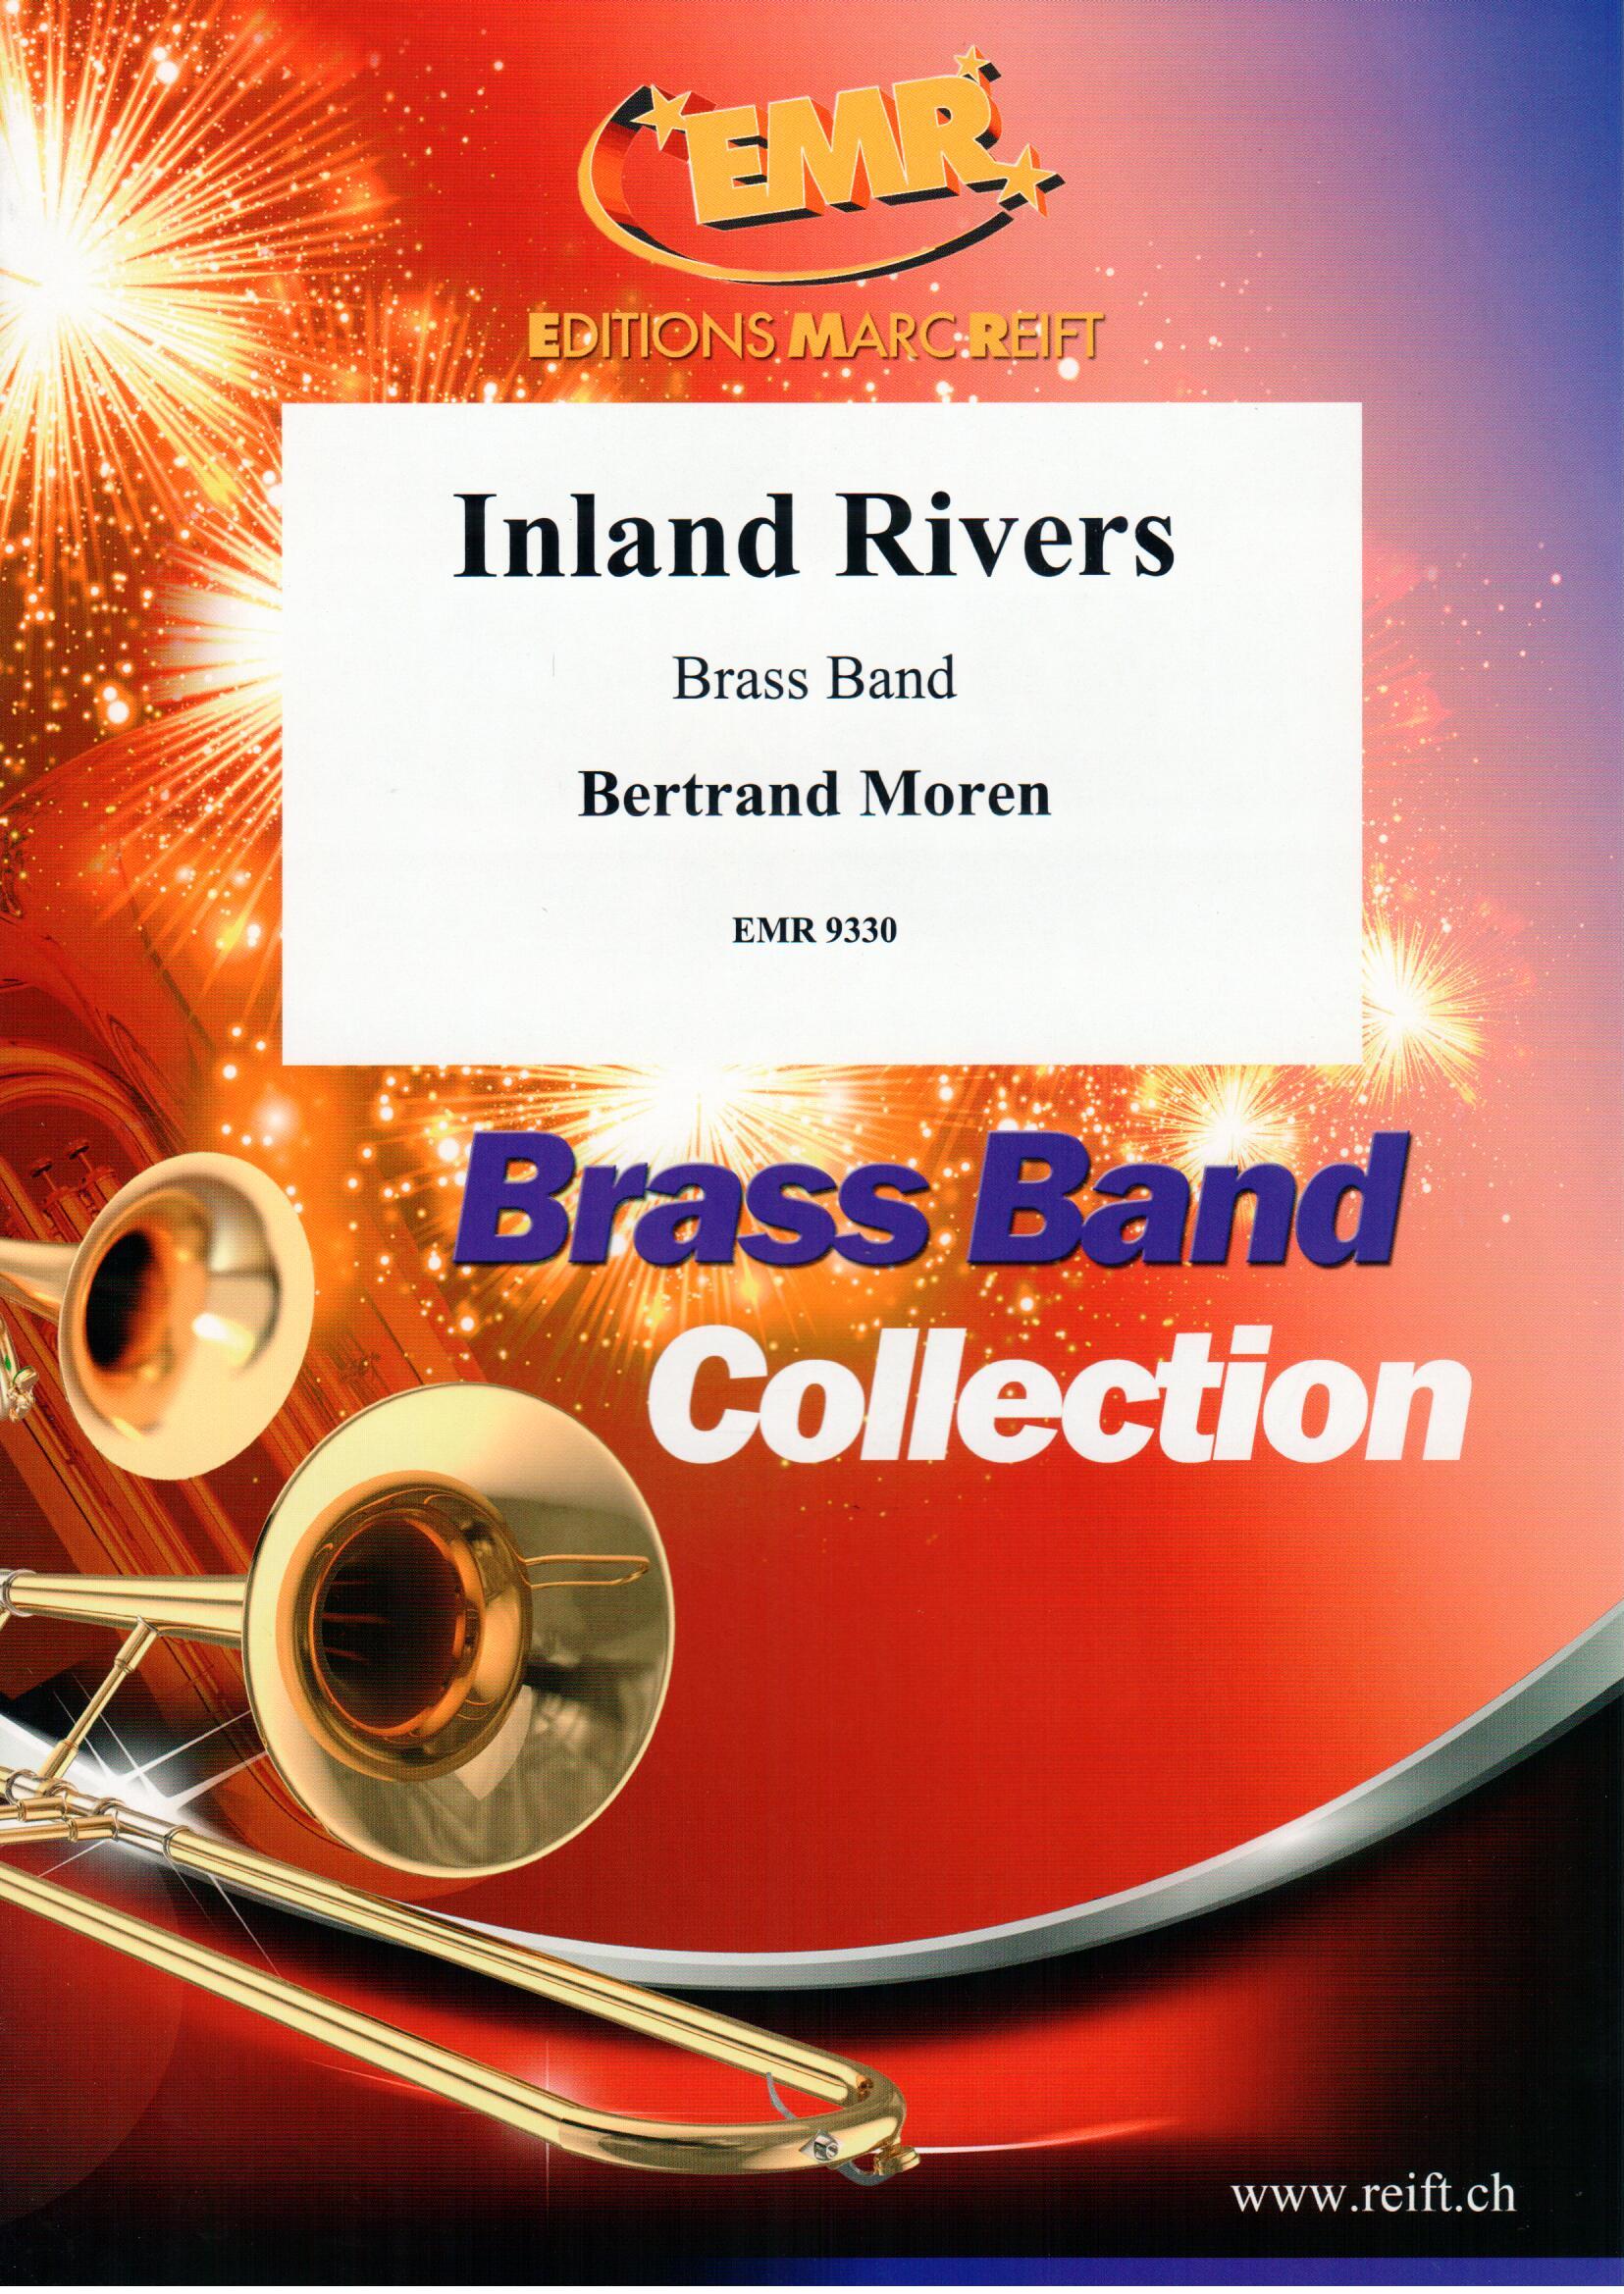 INLAND RIVERS, EMR BRASS BAND